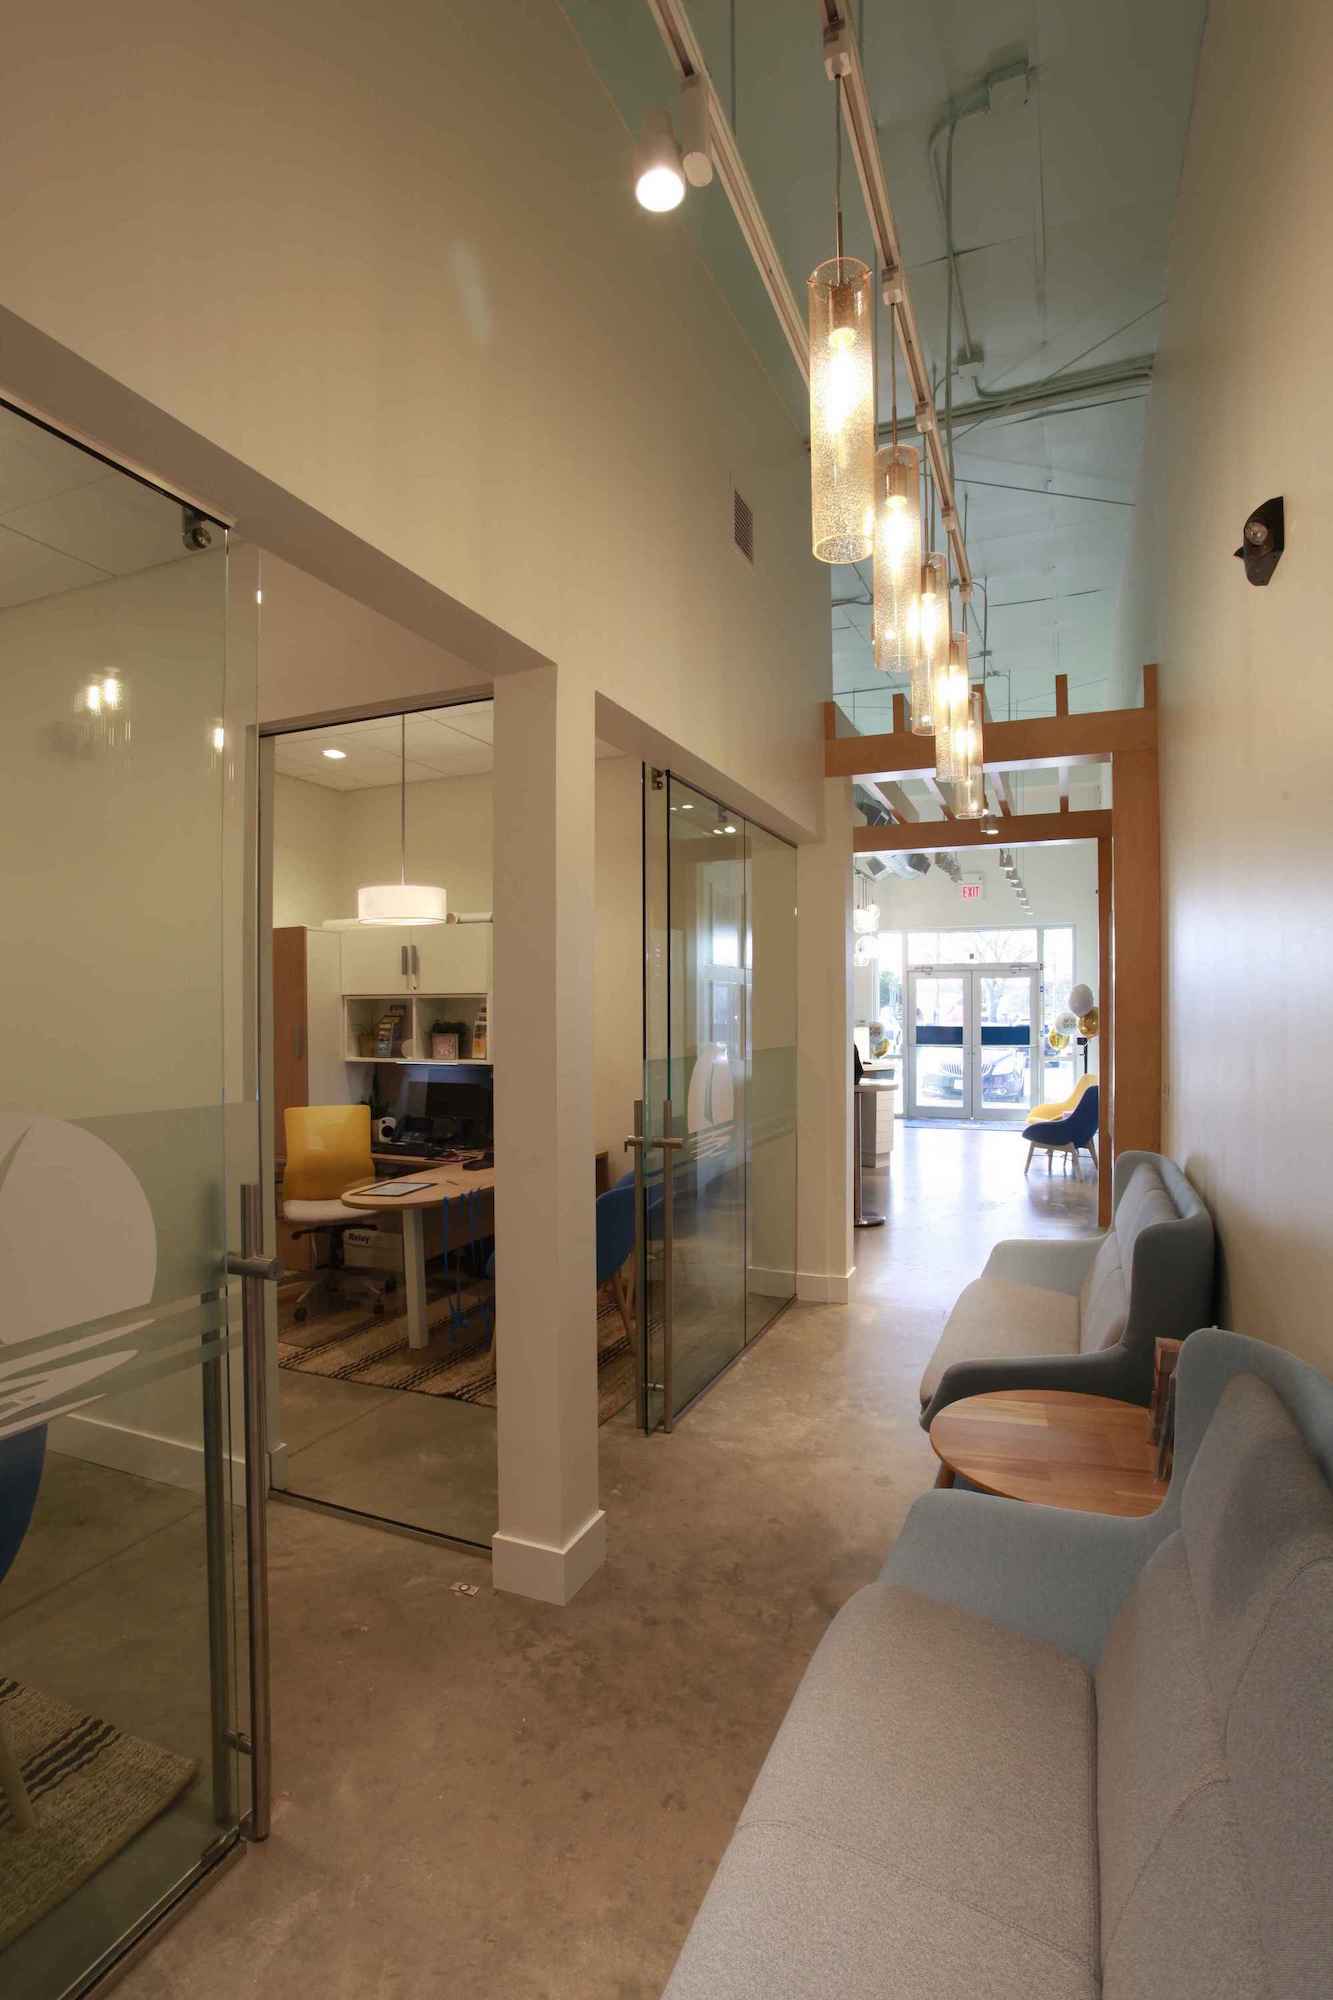 A glass-walled corner office containing a tan swivel chair and a desk, as viewed from the hallway outside. Two pale gray couches sit side by side along the hallway wall, and a row of slim glass pendant lights lines the ceiling. The front doors of the lobby can be seen beyond the hallway in the background.